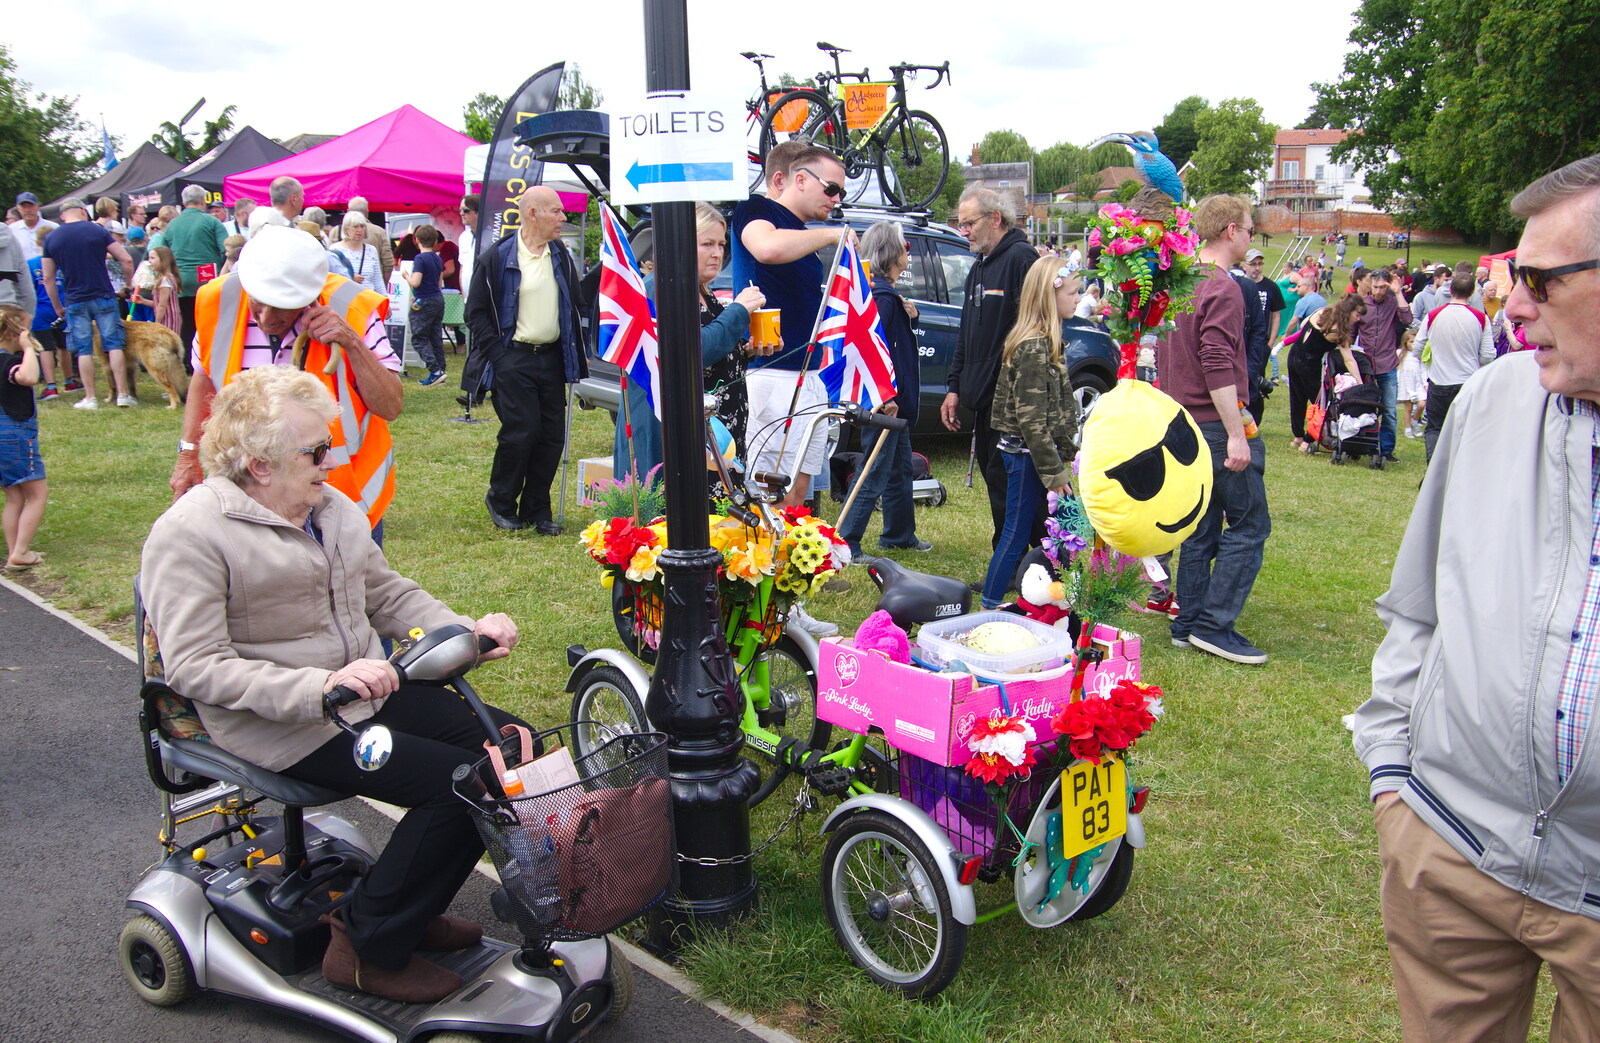 Pat 83's decorated quad bike is parked up from The Diss Carnival 2019, Diss, Norfolk - 9th June 2019